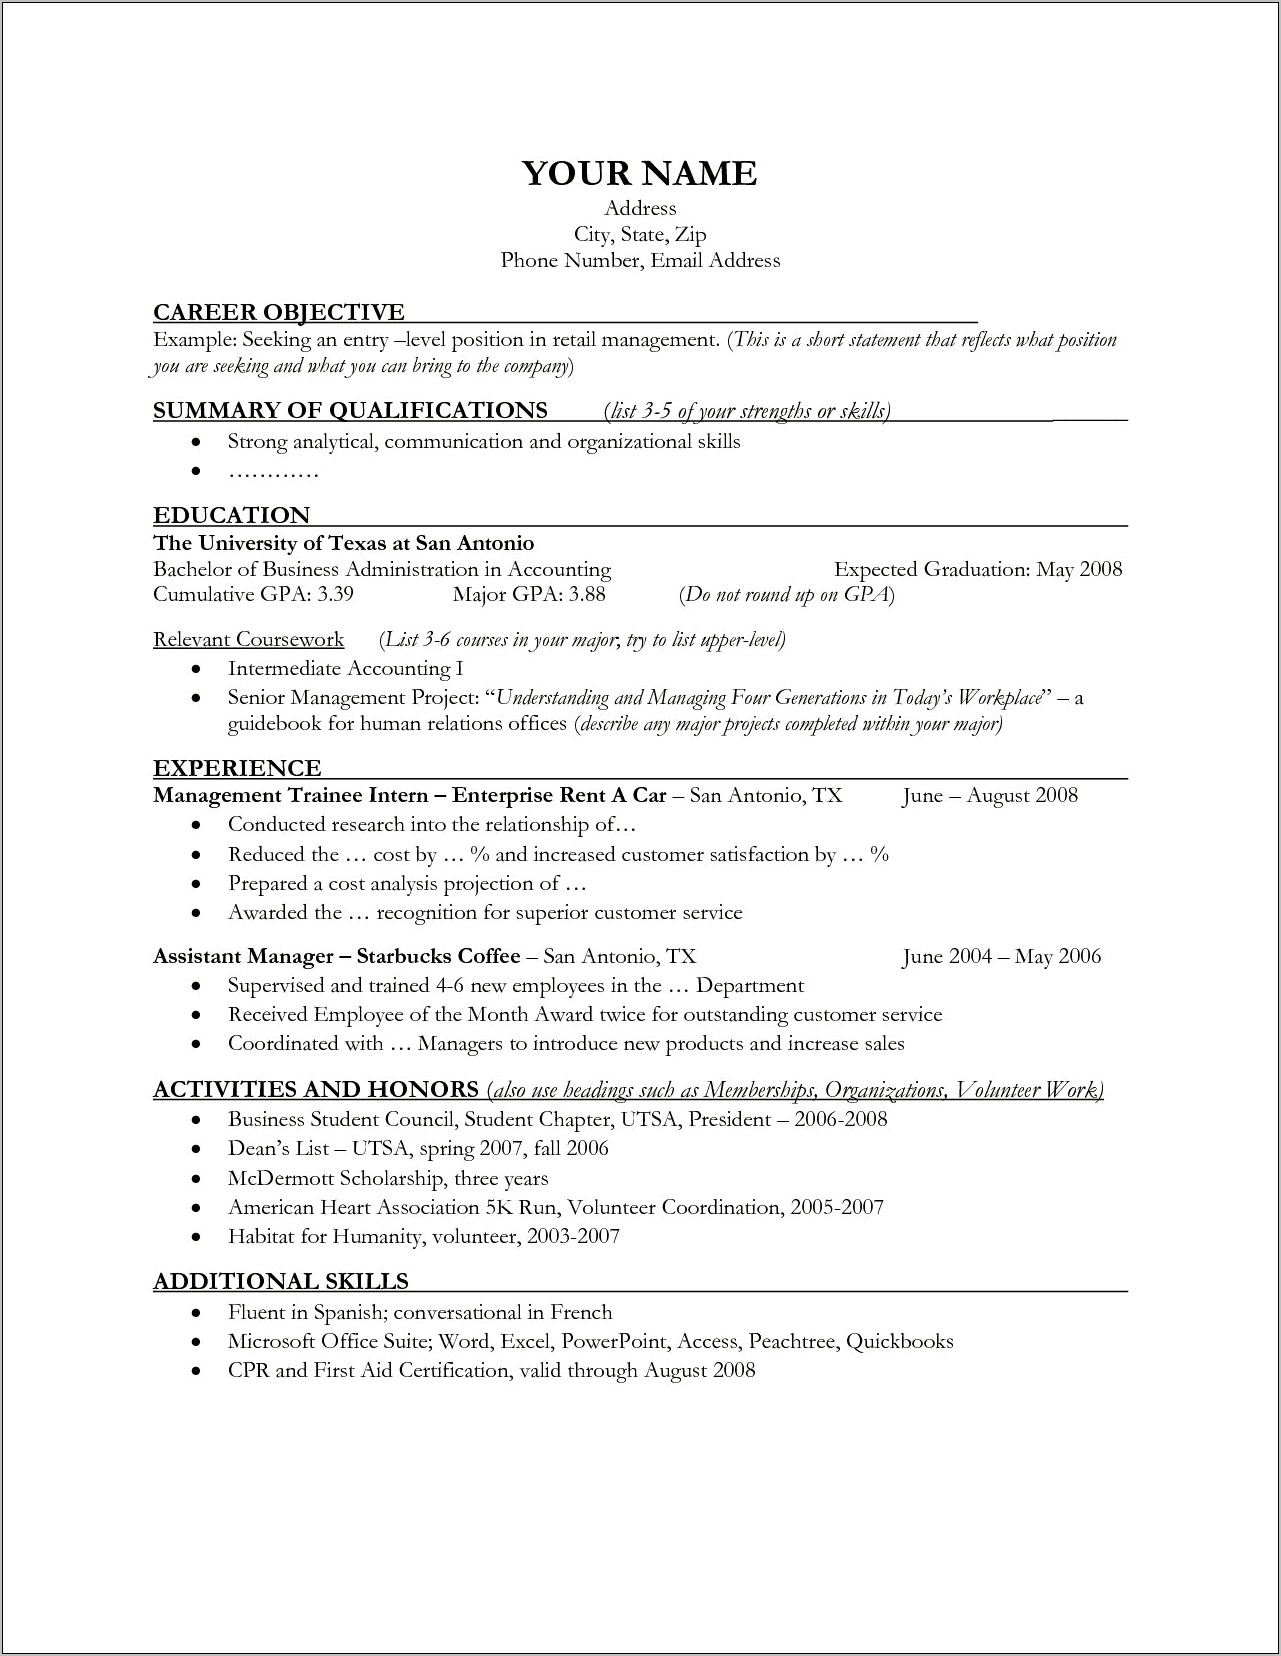 Sample Resumes For Retail Assistant Manager